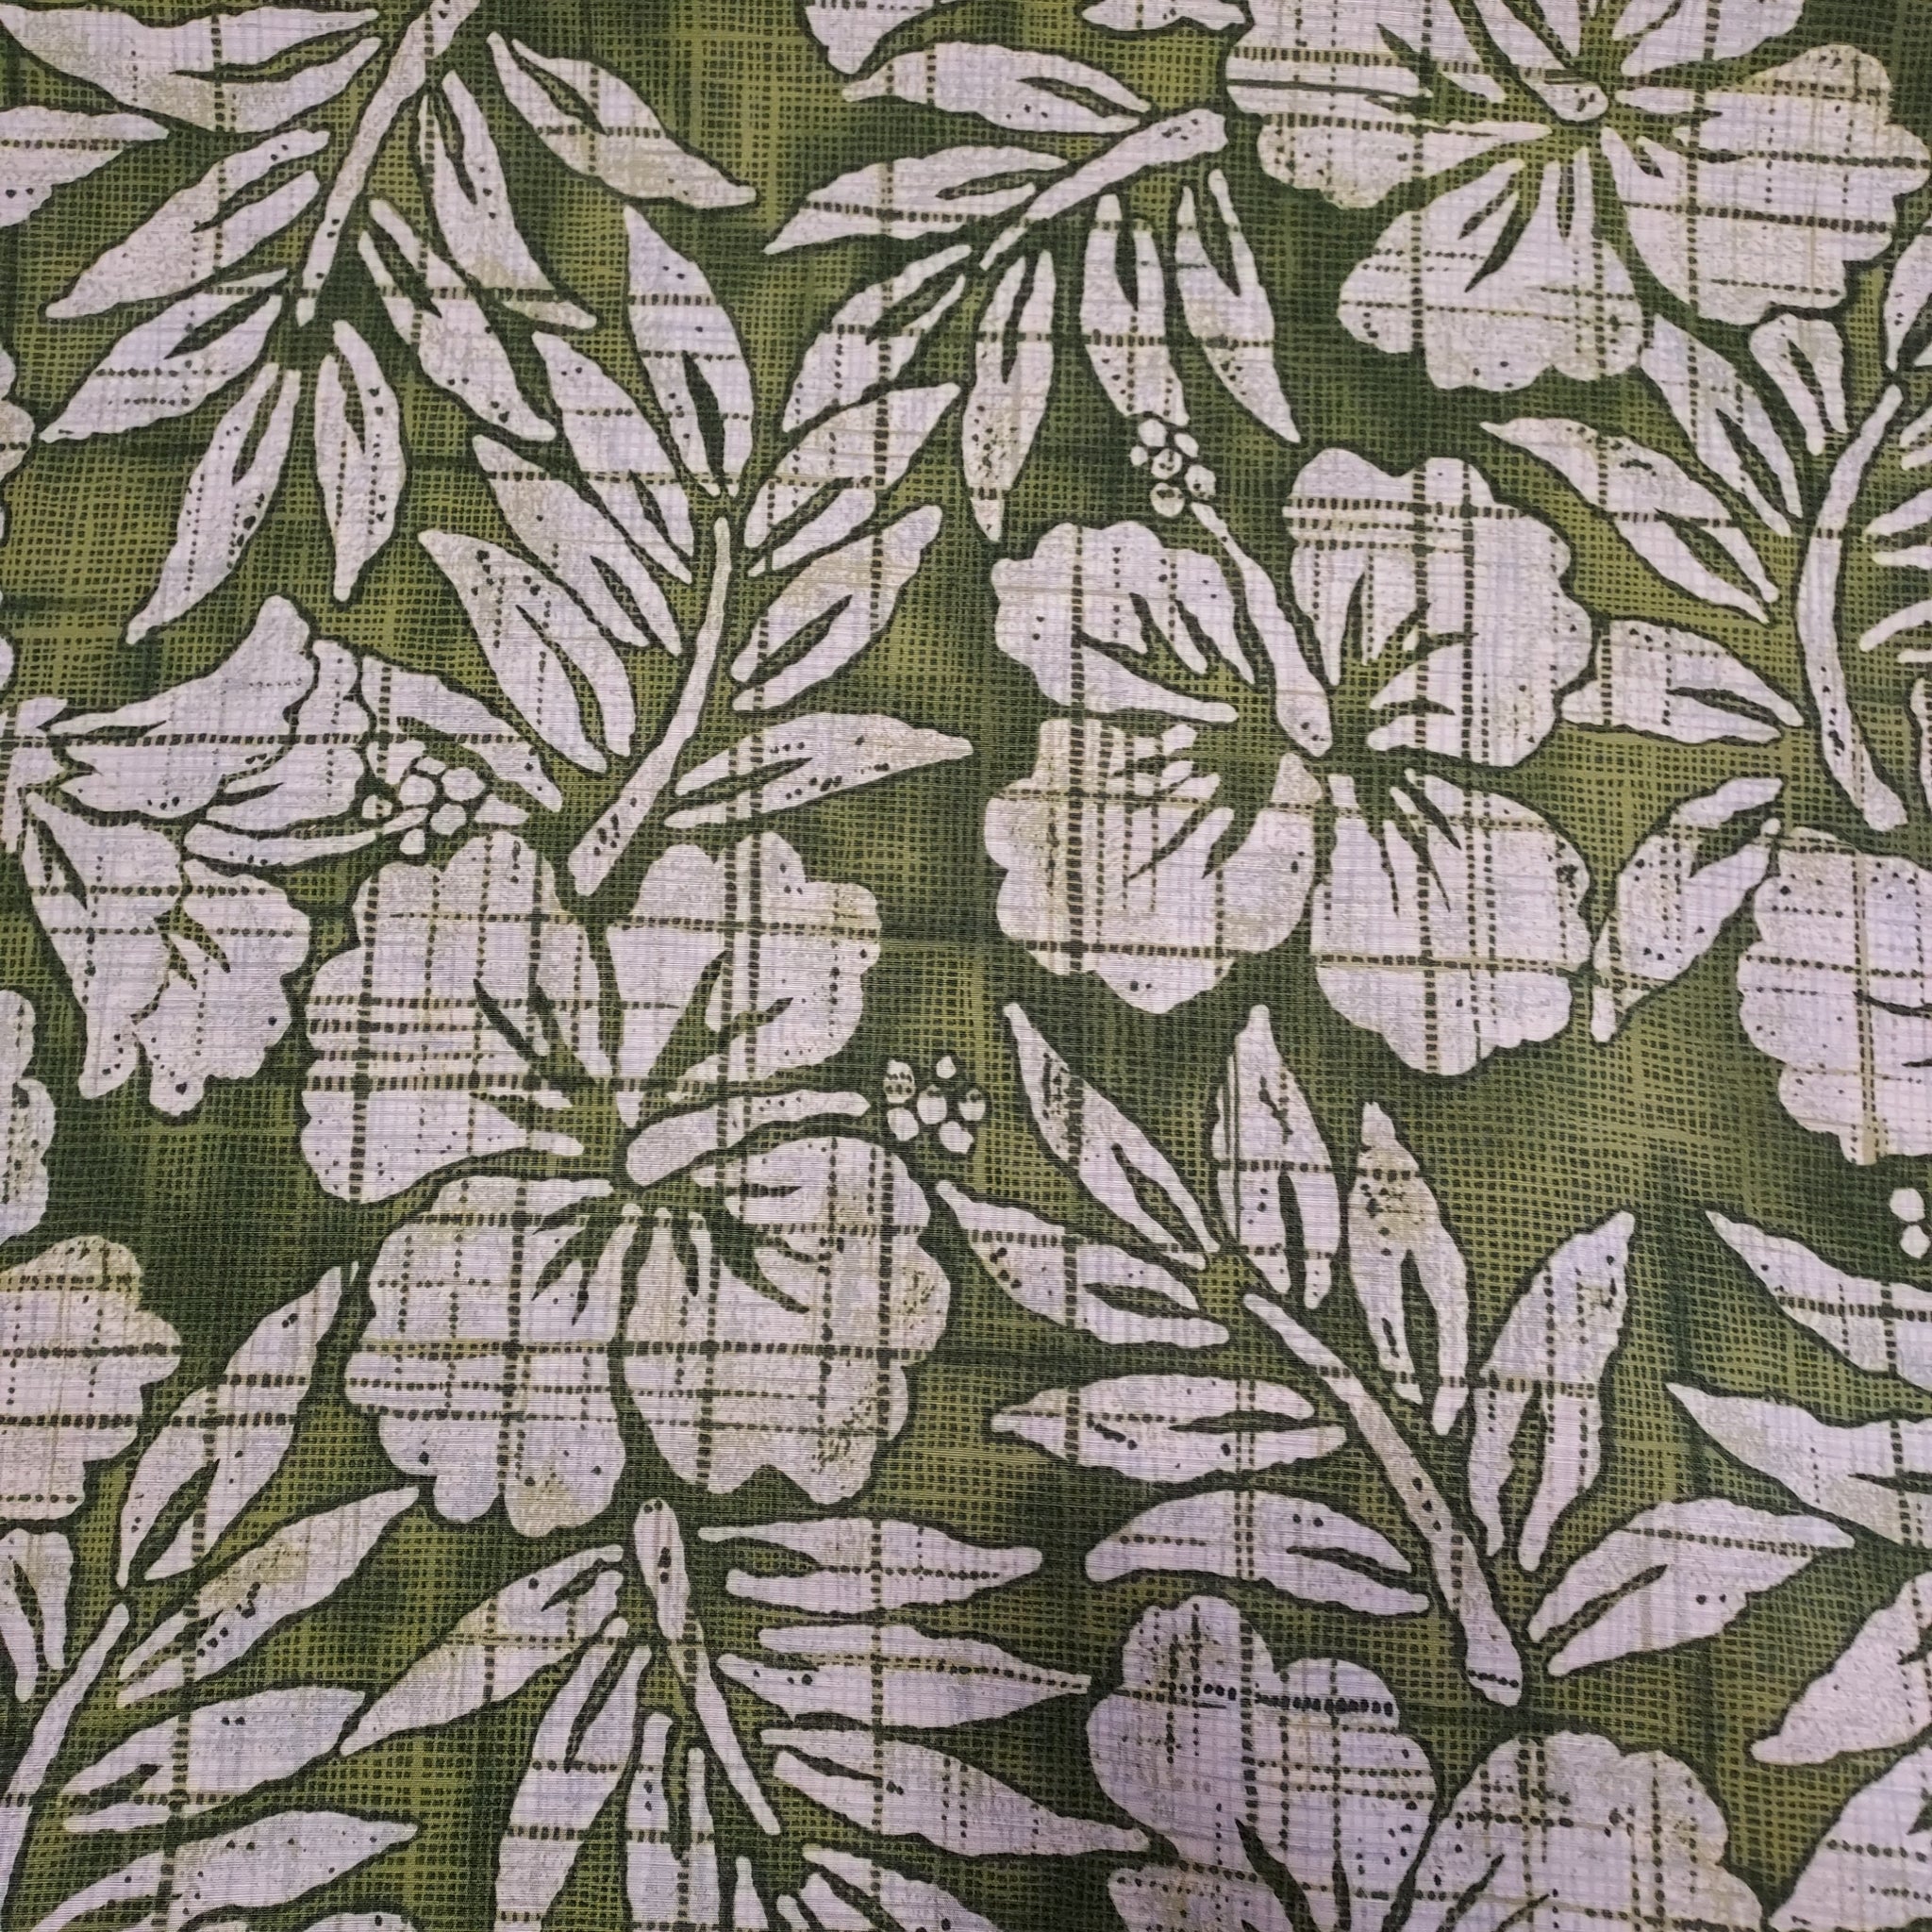 This fabric would make the best hawaiian shirt!  ©Kahala fabric it is full of island inspiration with white hibiscus flowers and leaves over a green background. Bringing back the 2000s island vibe! Make your next summer outfit with this pretty fabric.   100% Rayon  44"